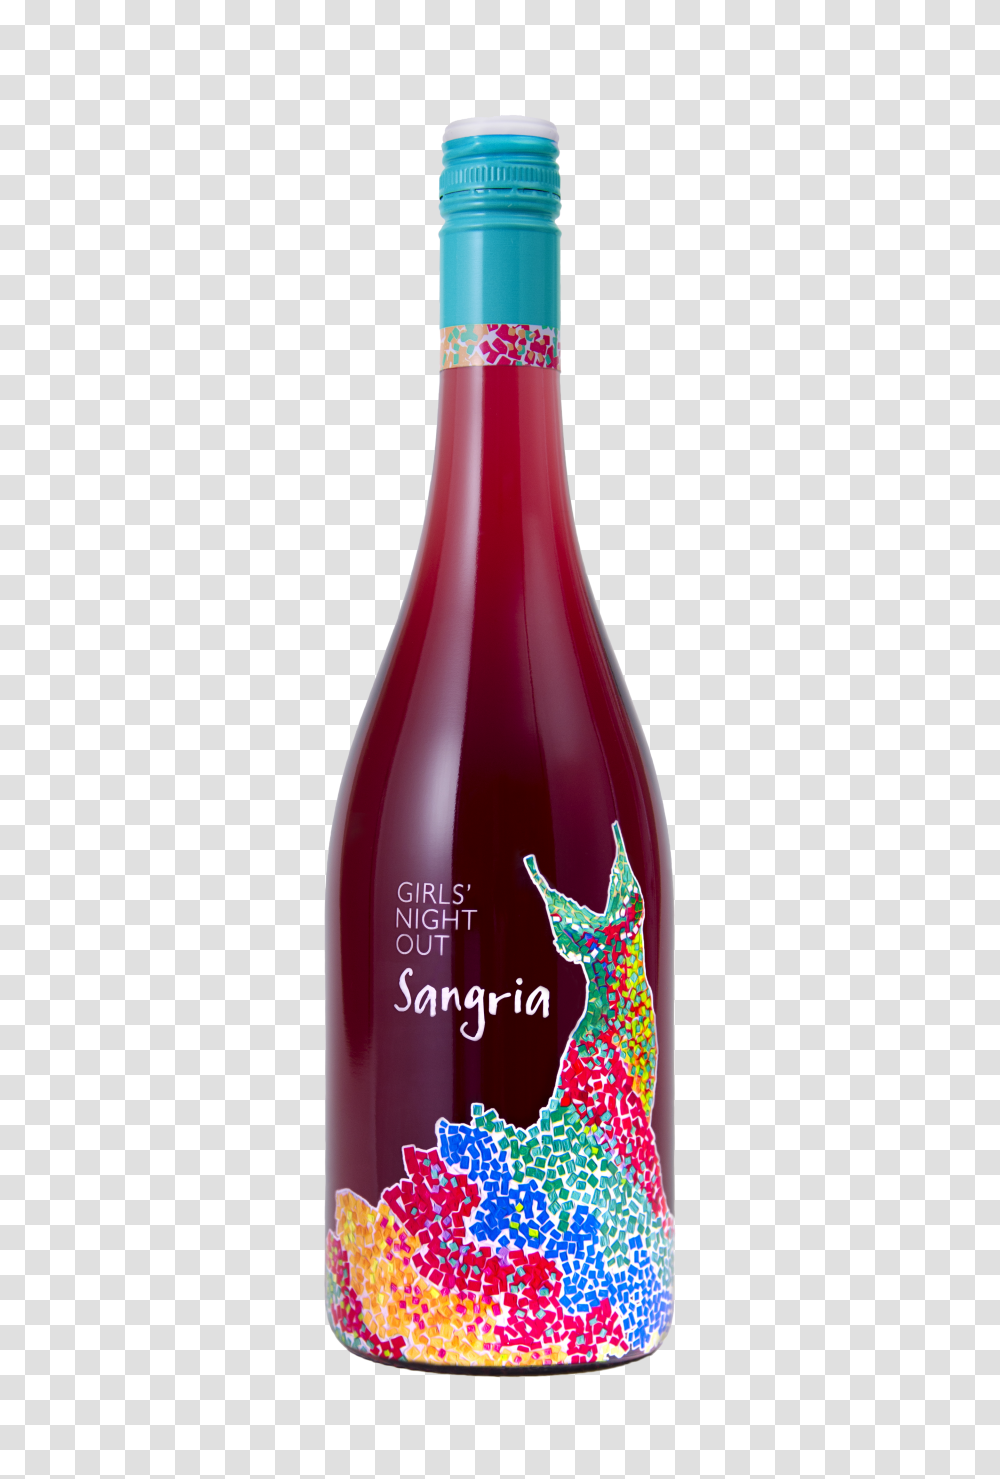 Girls Night Out Sangria Colio Winery Transparent Png